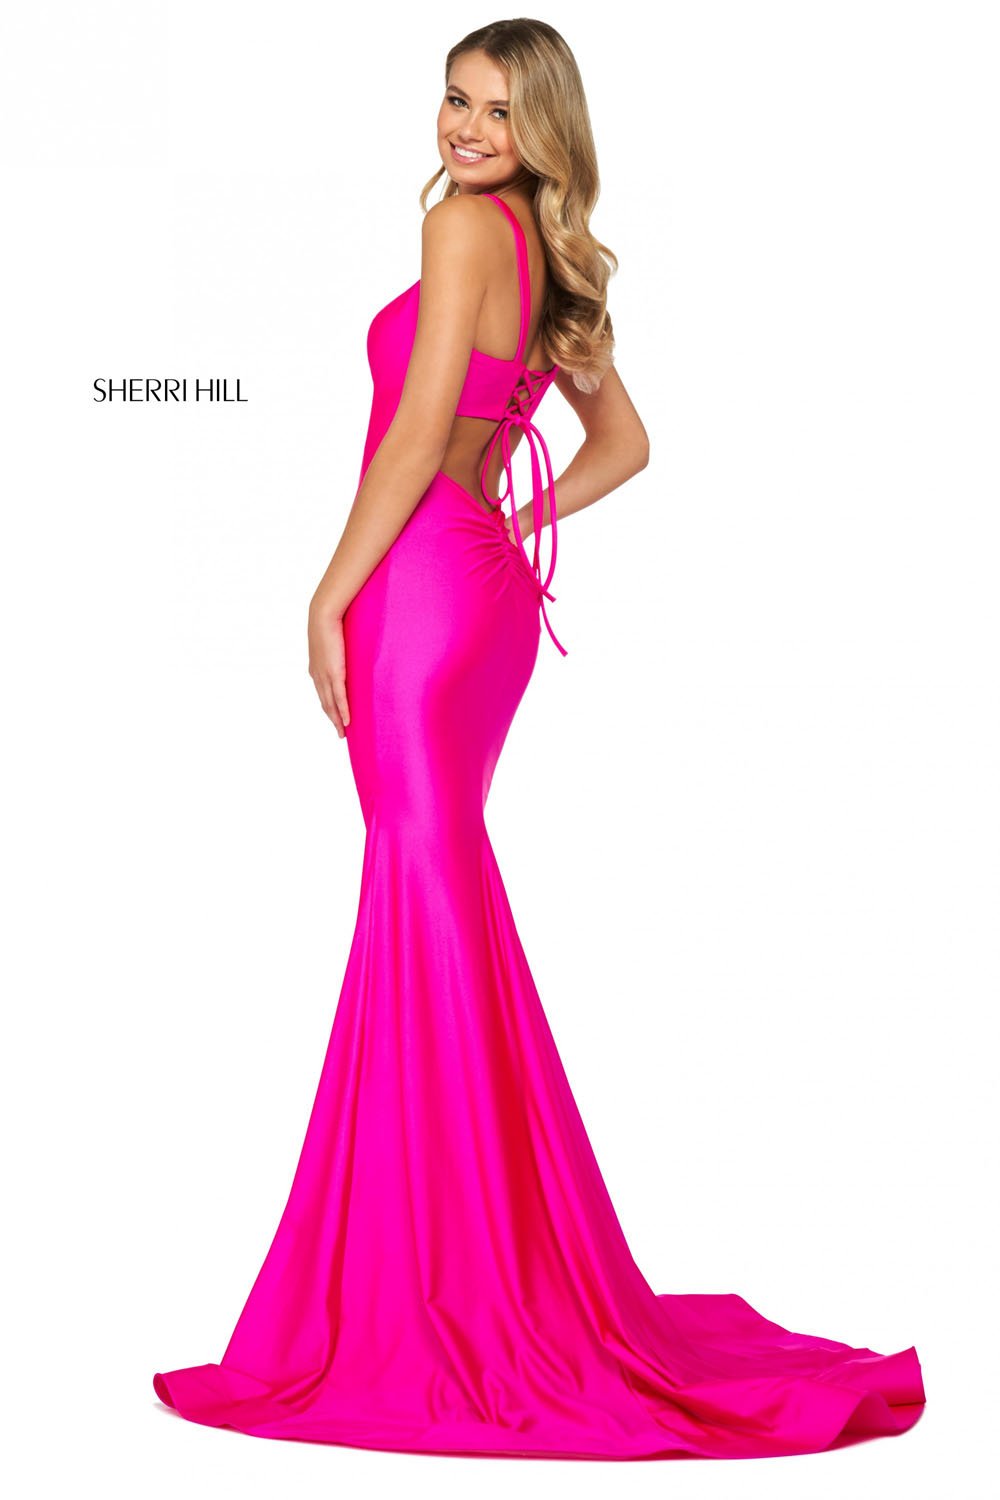 Sherri Hill 53906 dress images in these colors: Dark Coral, Fuchsia, Dark Periwinkle, Red, Black, Navy, Turquoise, Royal, Emerald, Ruby.